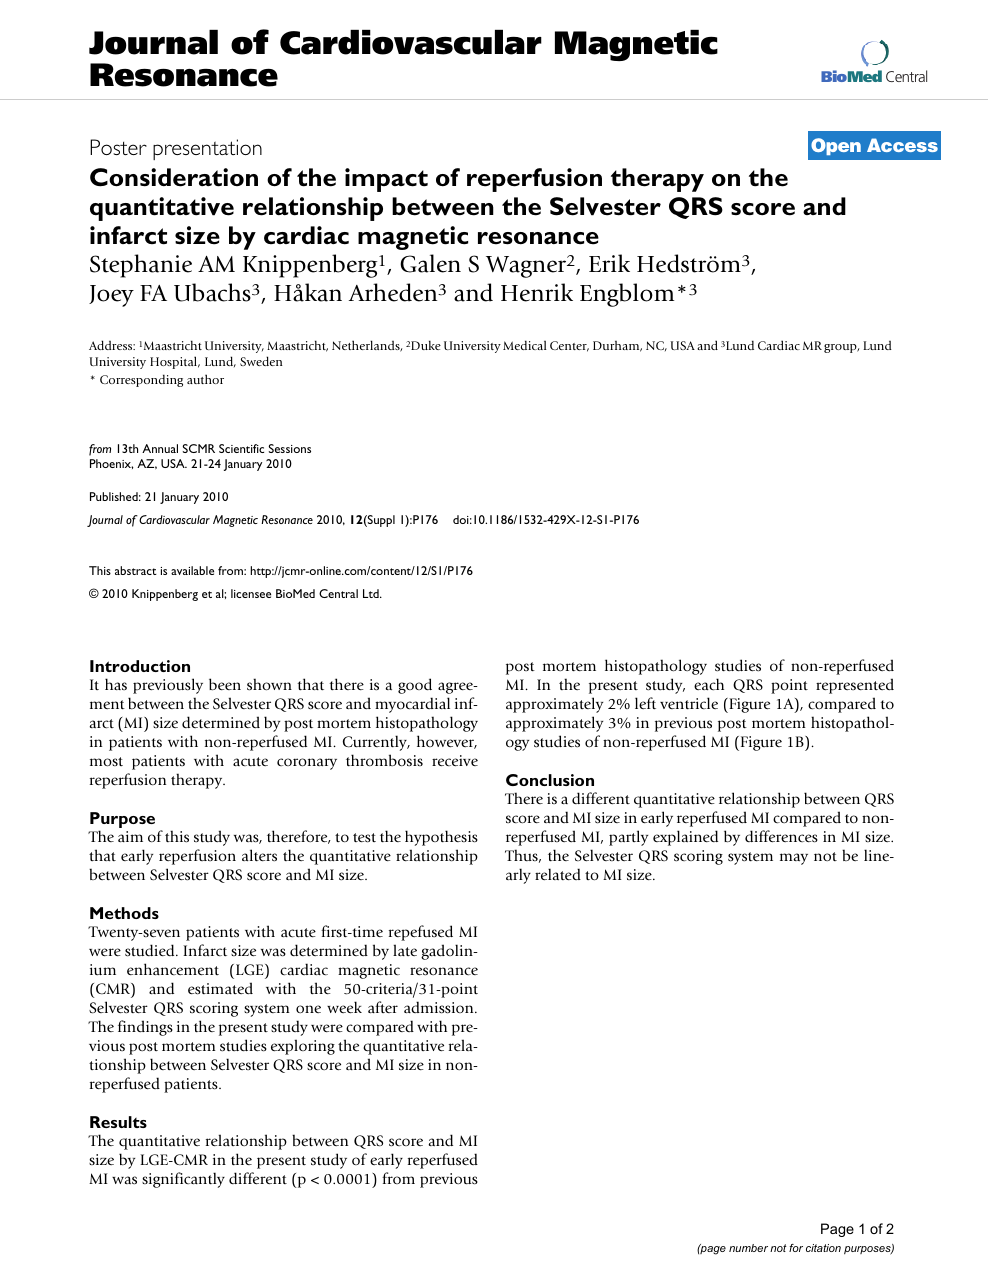 Tilbagekaldelse Hængsel Tyranny Consideration of the impact of reperfusion therapy on the quantitative  relationship between the Selvester QRS score and infarct size by cardiac  magnetic resonance – topic of research paper in Medical engineering.  Download